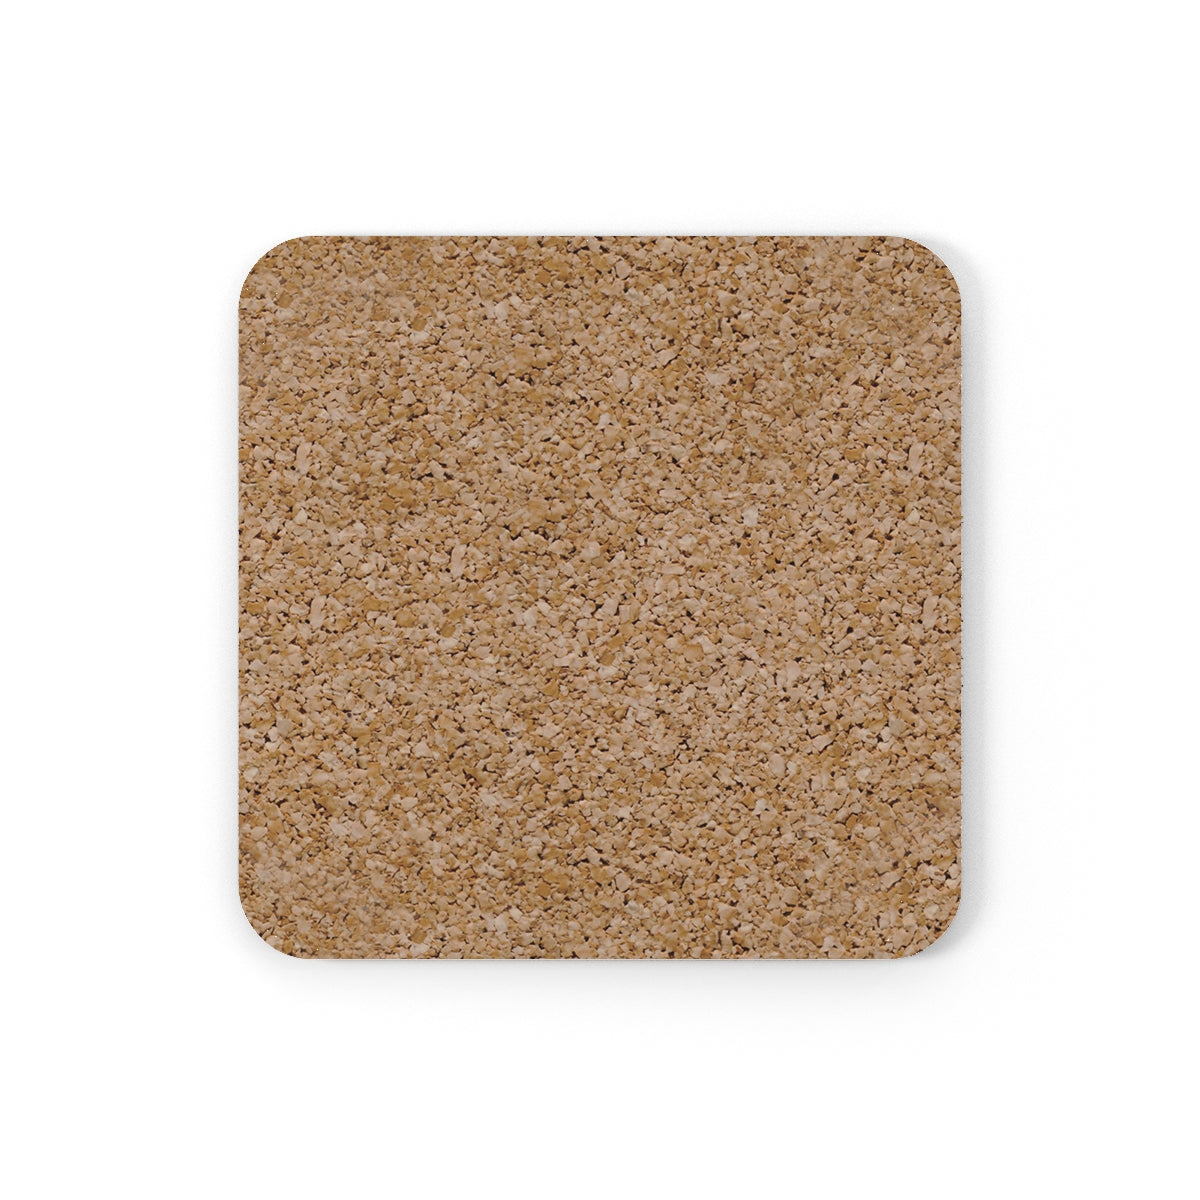 Back View of Square-shaped Cork Back Coaster with Custom Pet Portrait Print - Petclusiv